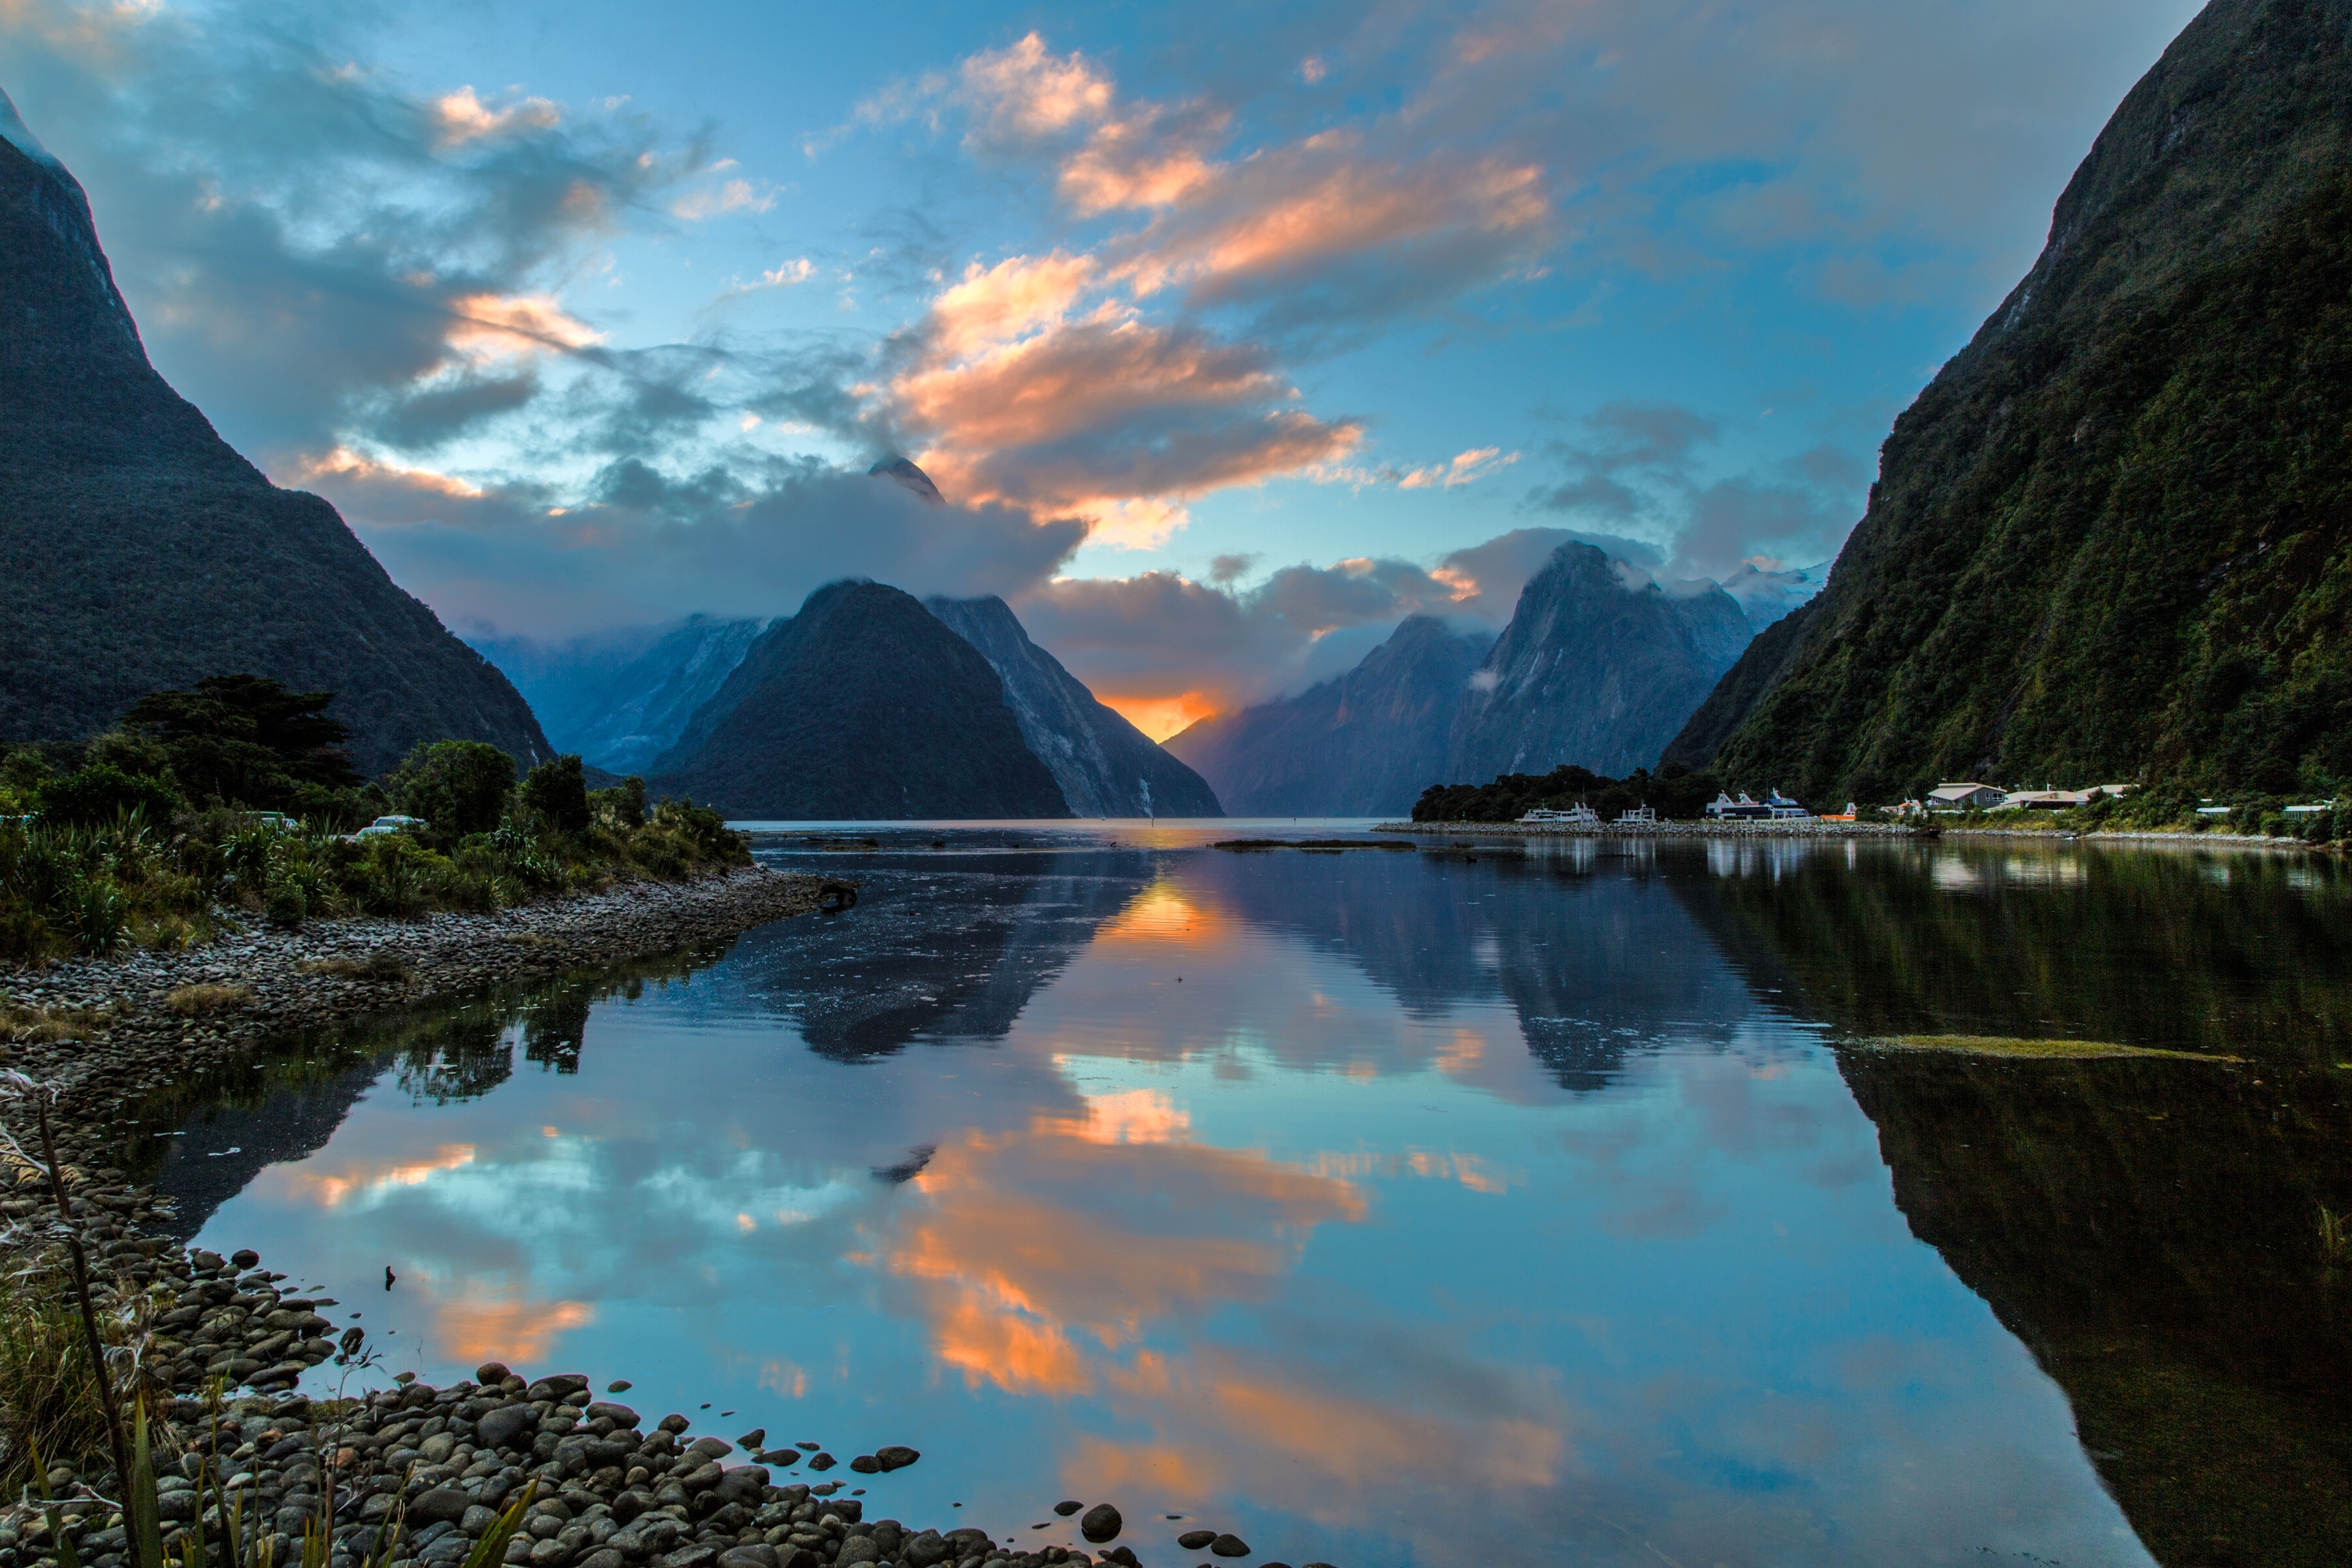 86762 download wallpaper nature, mountains, reflection, new zealand, bay, milford sound screensavers and pictures for free